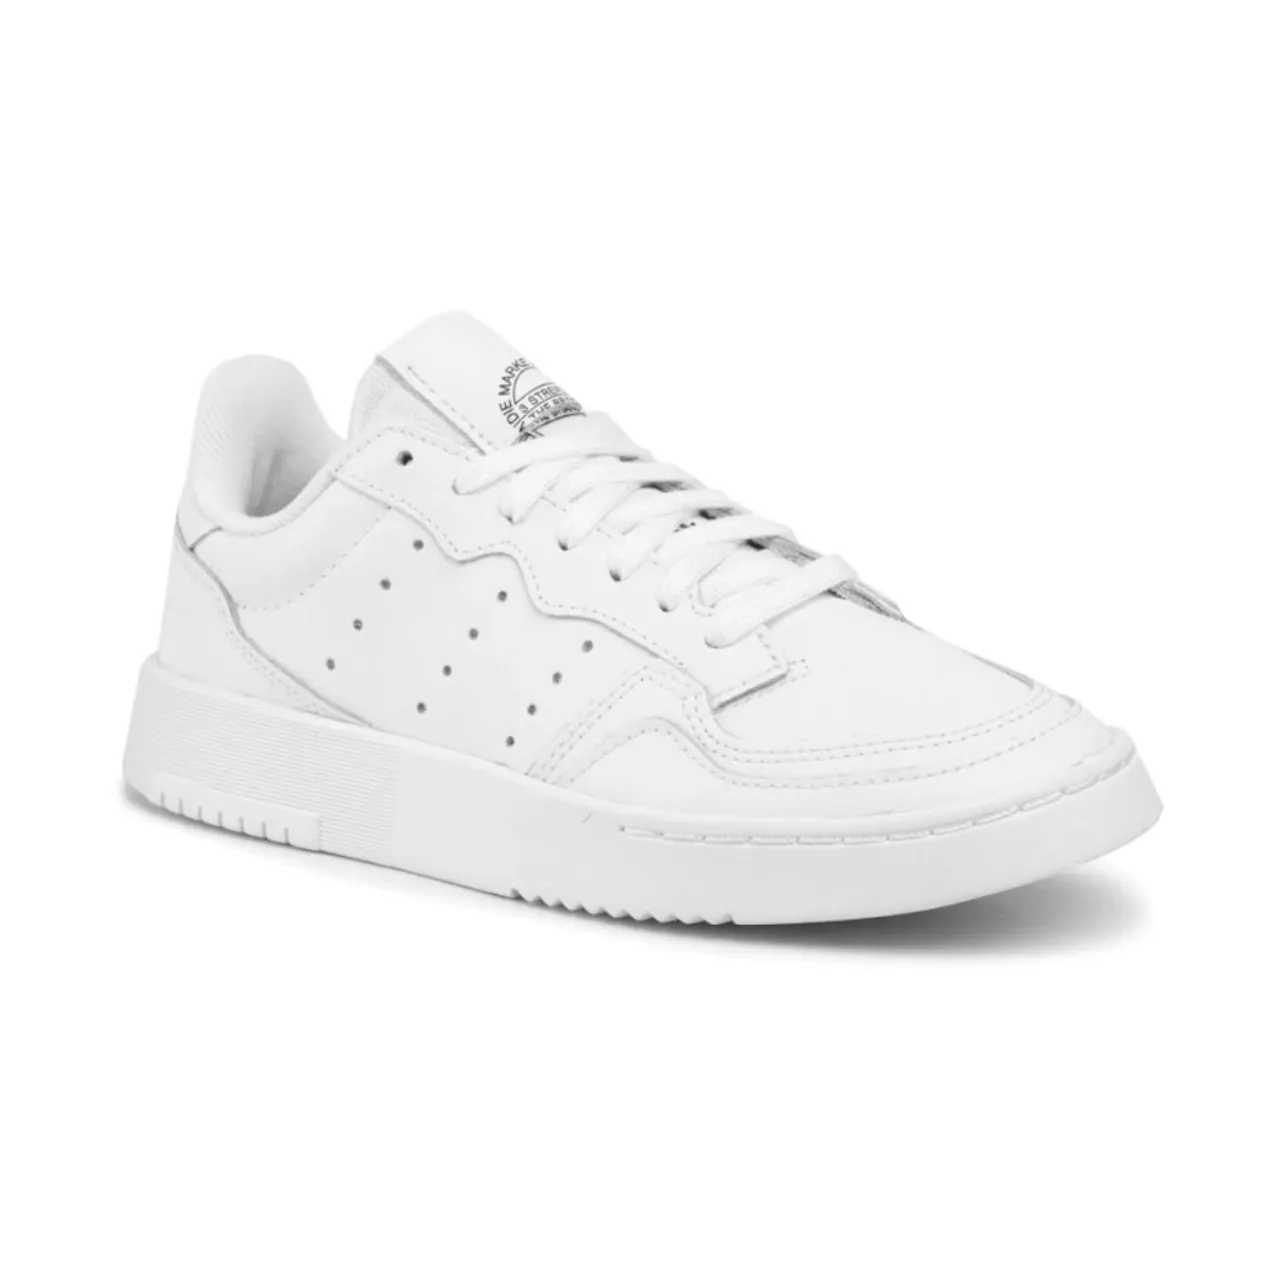 Jugend Supercourt Sneakers Adidas